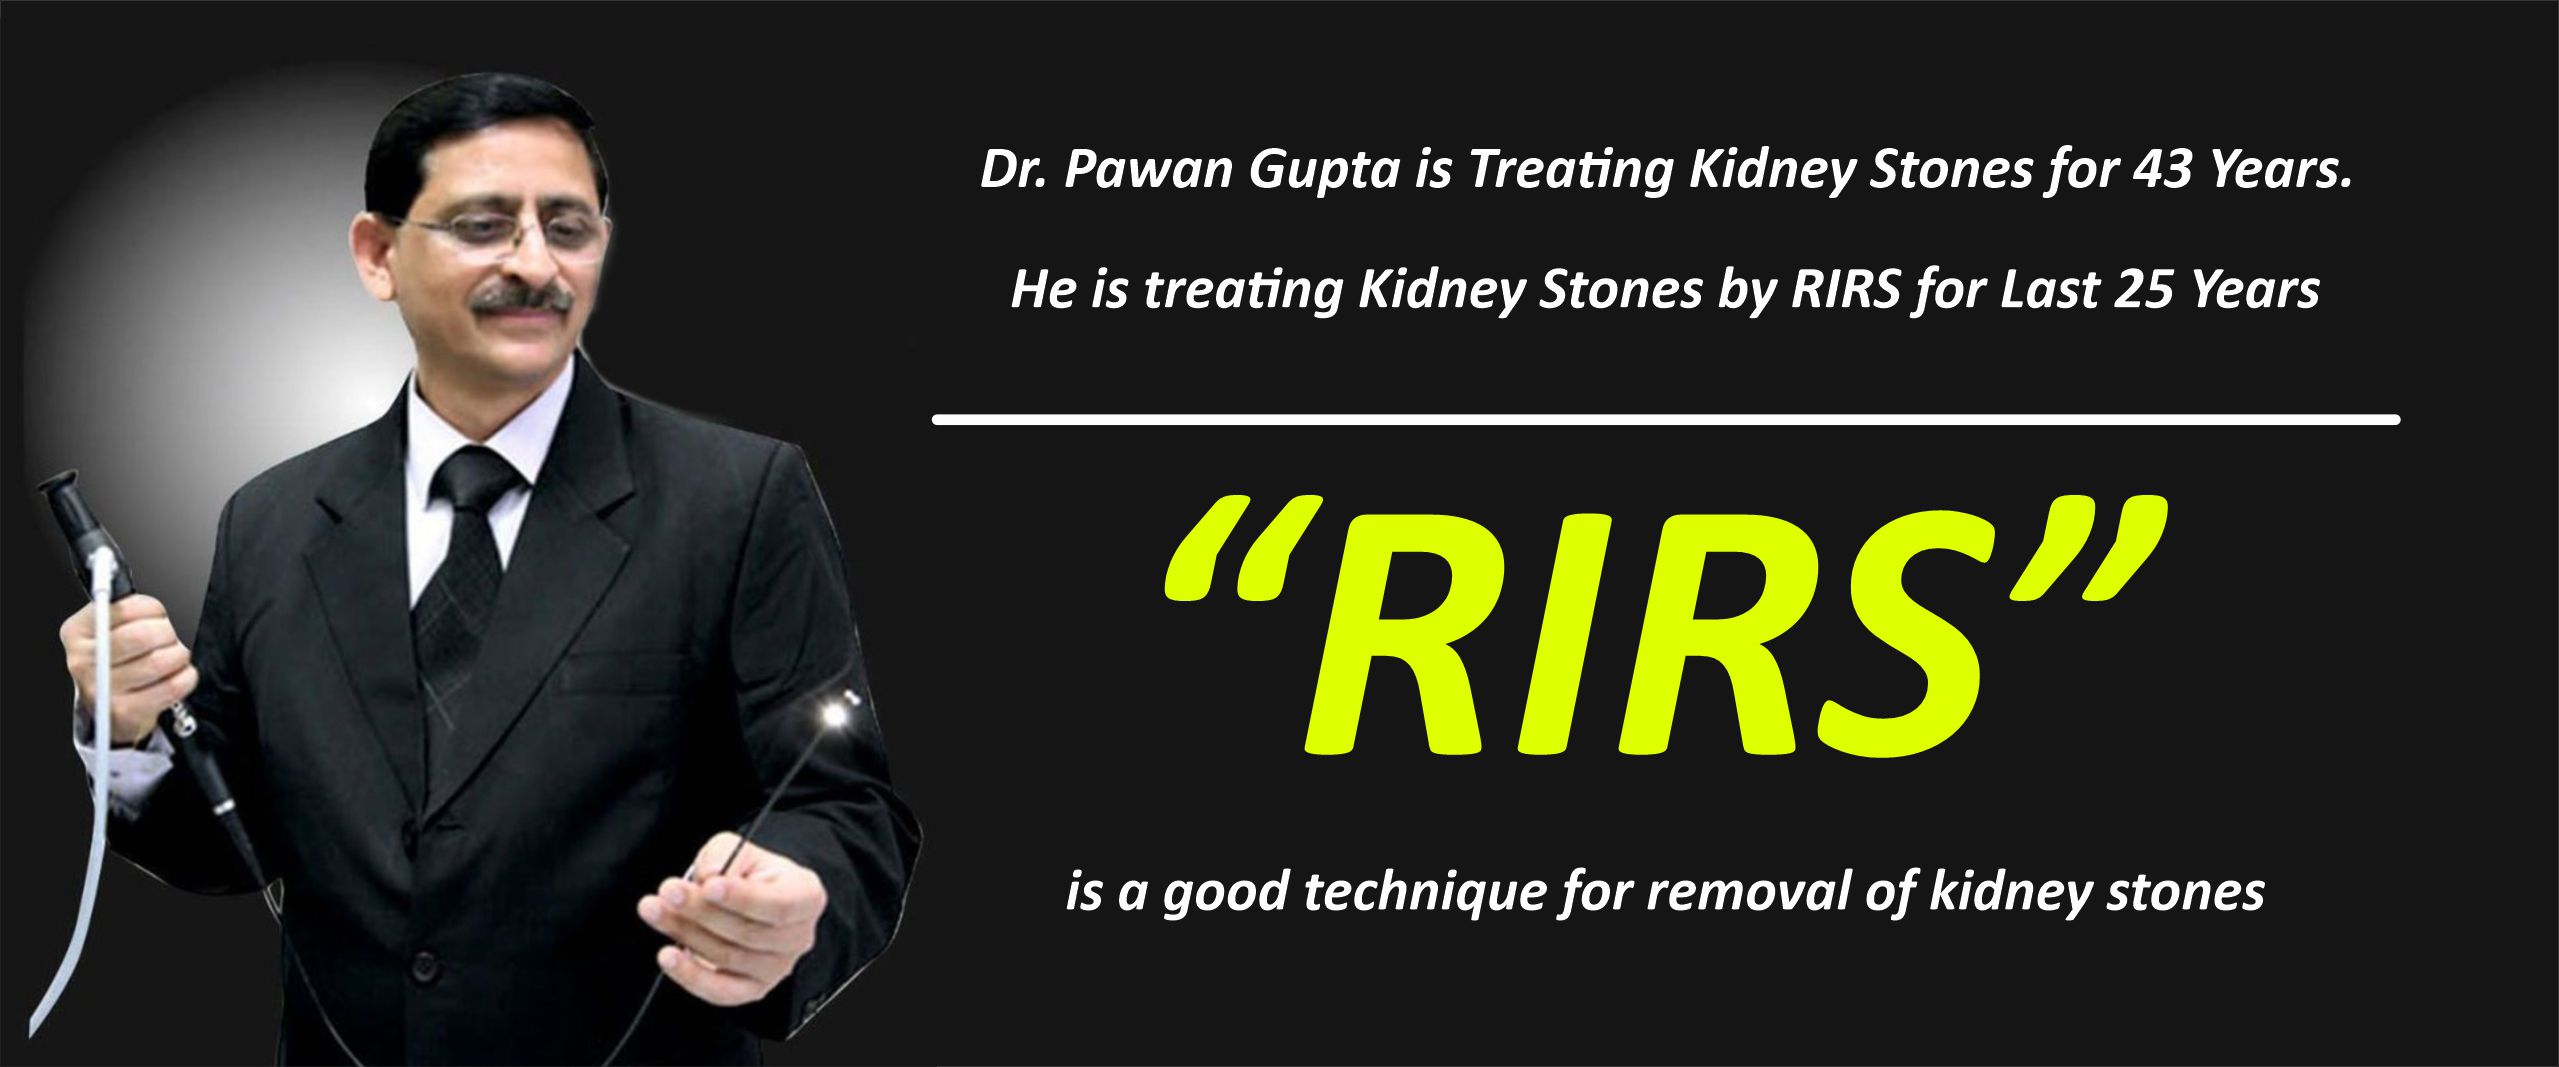 RIRS-is-a-fgood-technique-for-removal-of-kidney-stones